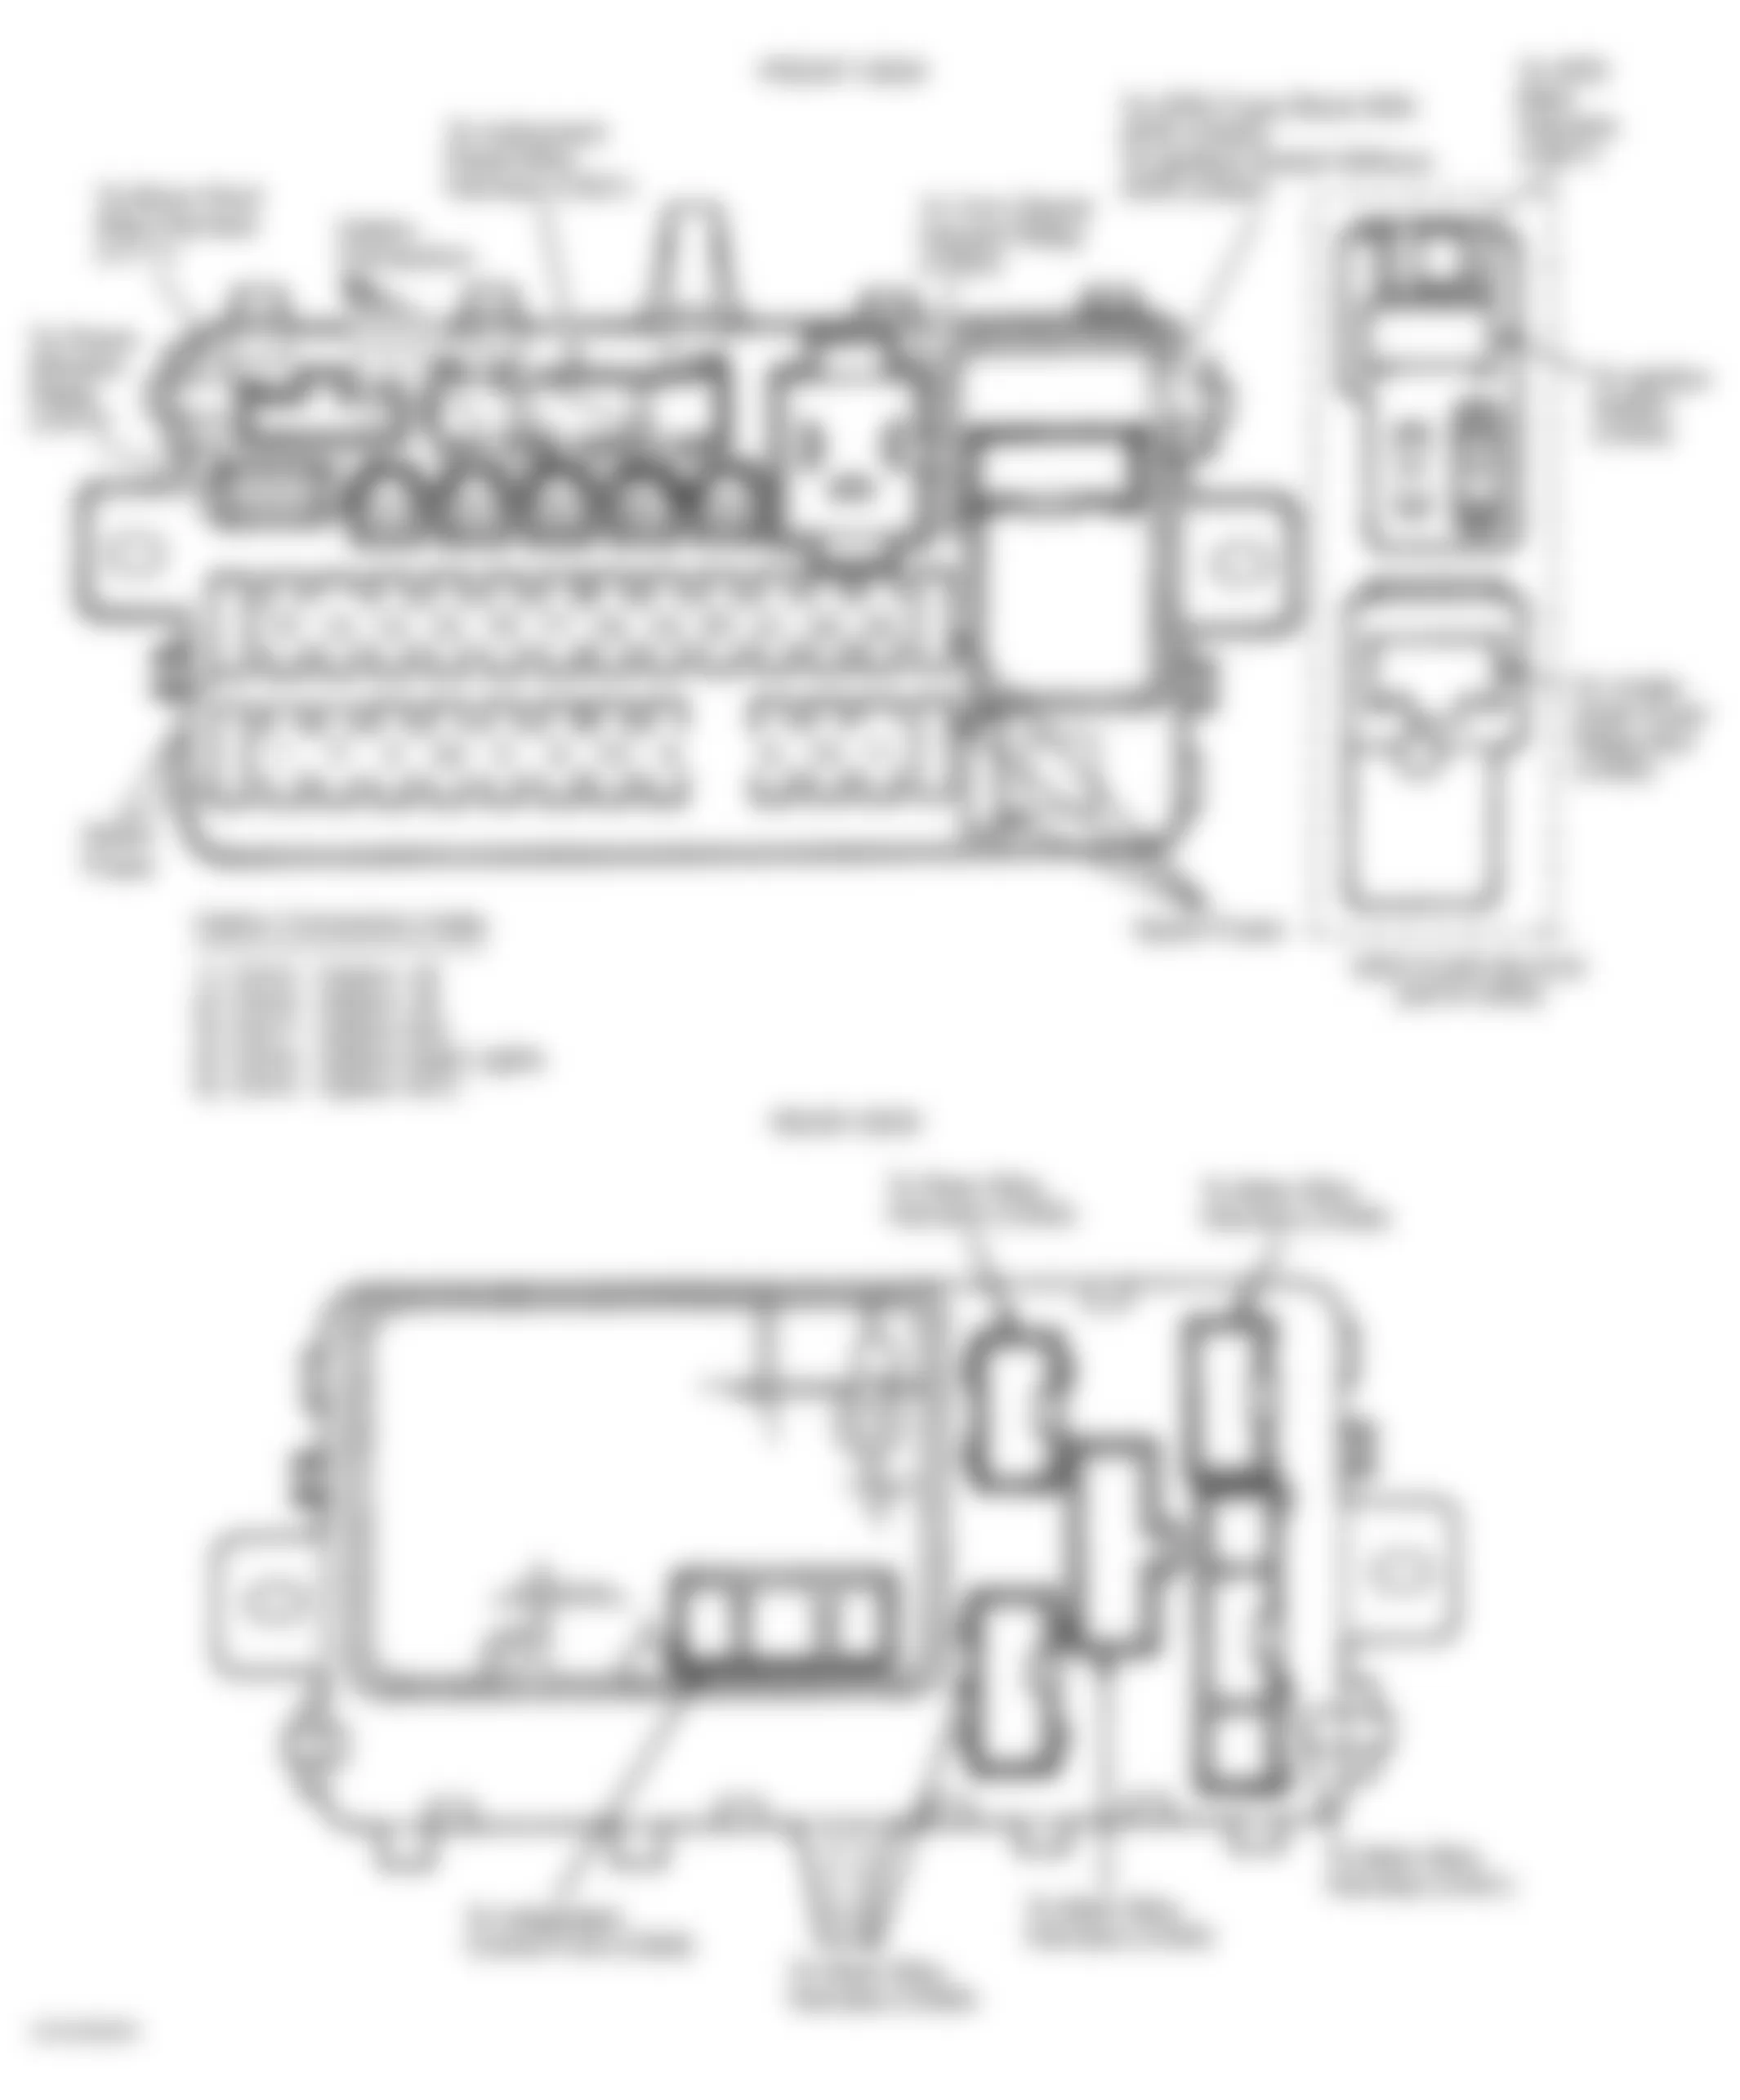 Honda Civic DX 1993 - Component Locations -  Identifying Under-Dash Fuse/Relay Box Components (1994-95 Civic)